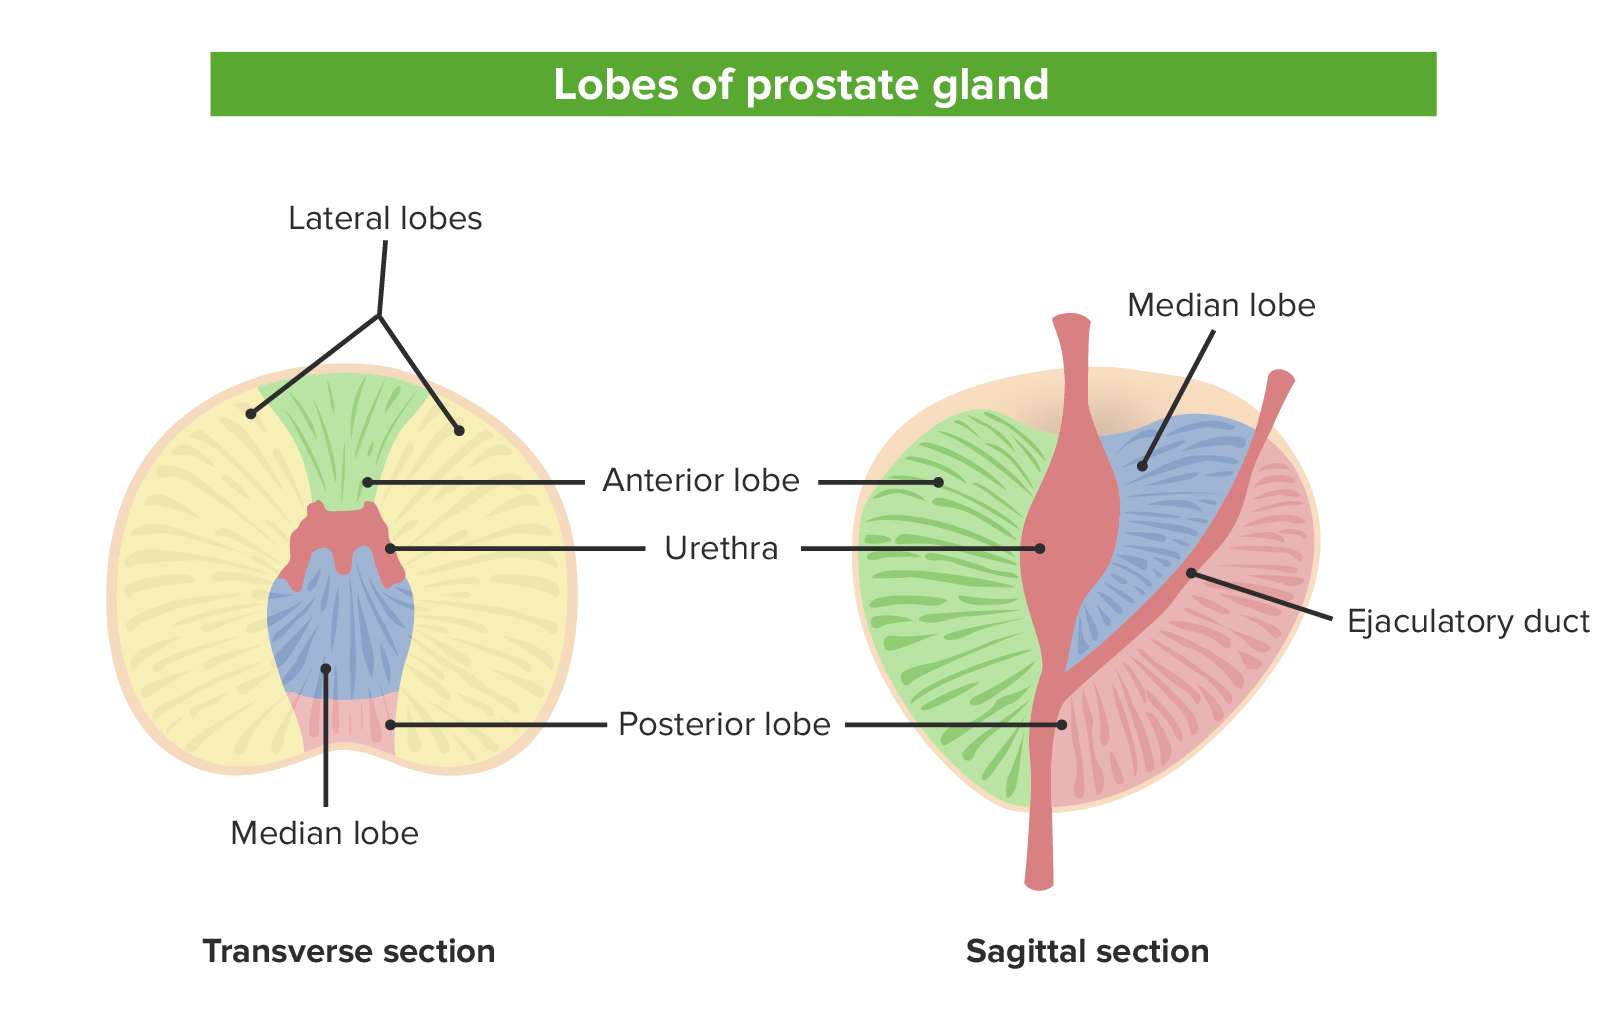 What causes enlargement of the prostate